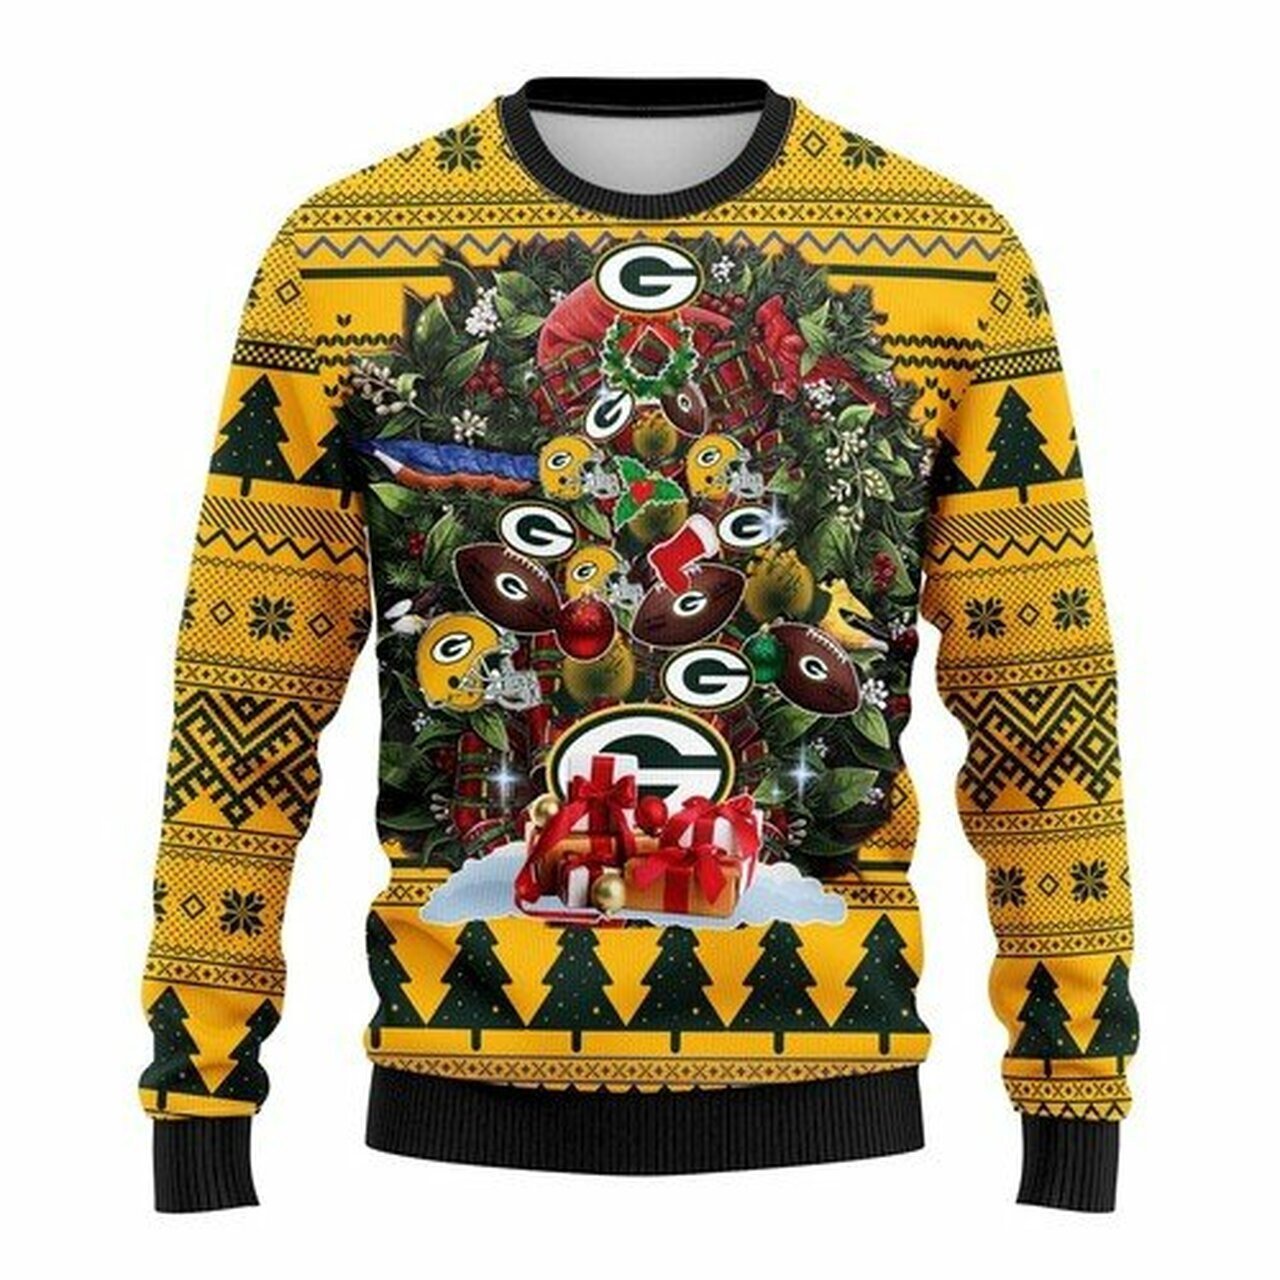 [ HOT ] NFL Green Bay Packers christmas tree ugly sweater – Saleoff 040122